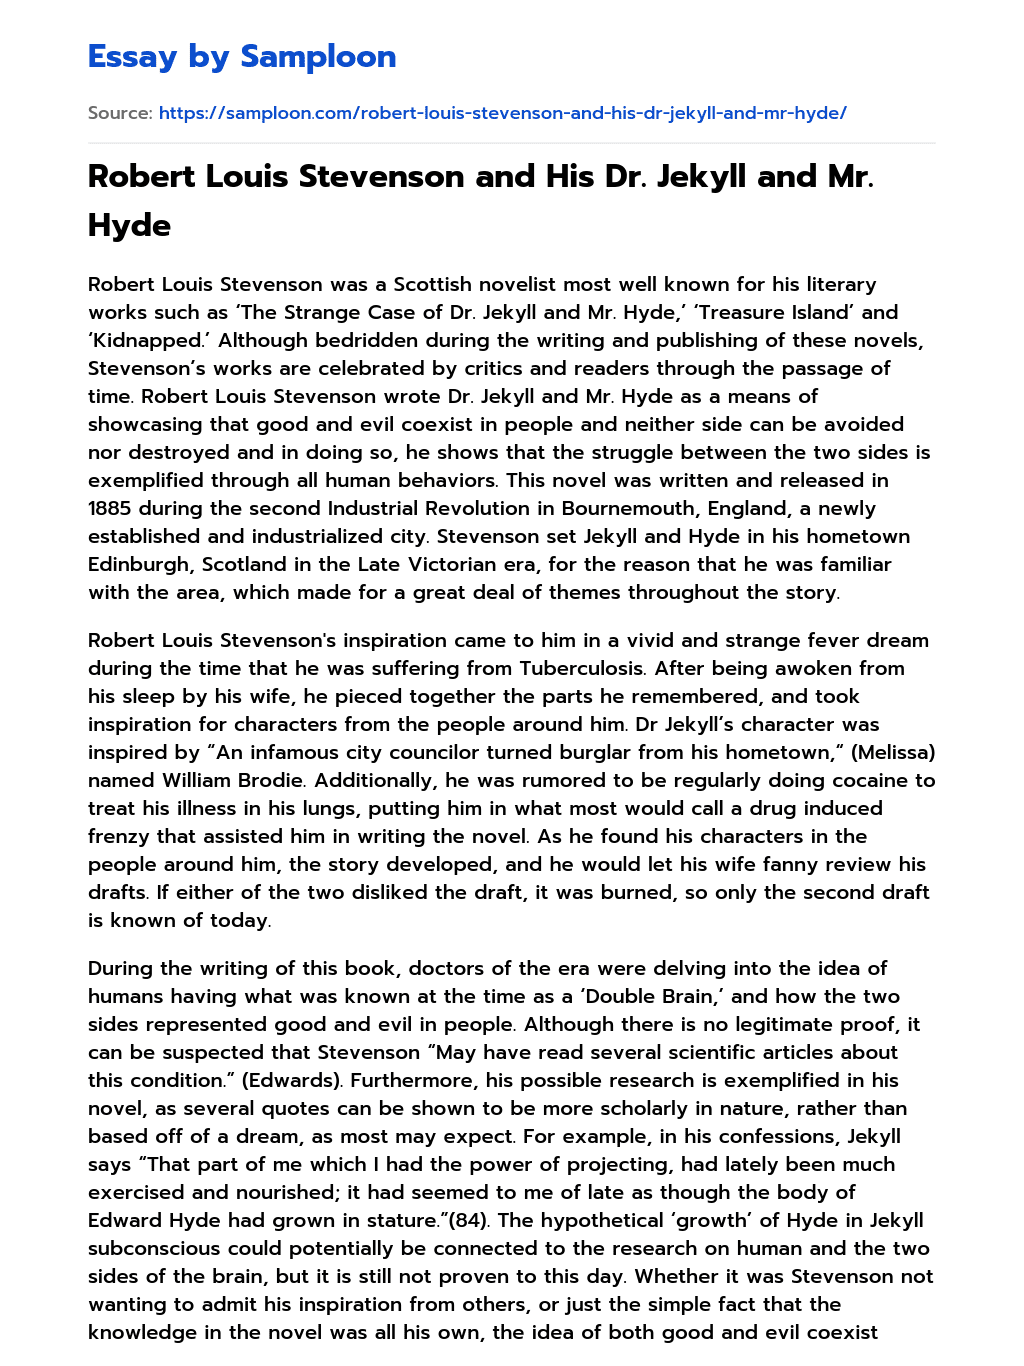 Robert Louis Stevenson and His Dr. Jekyll and Mr. Hyde Analytical Essay essay